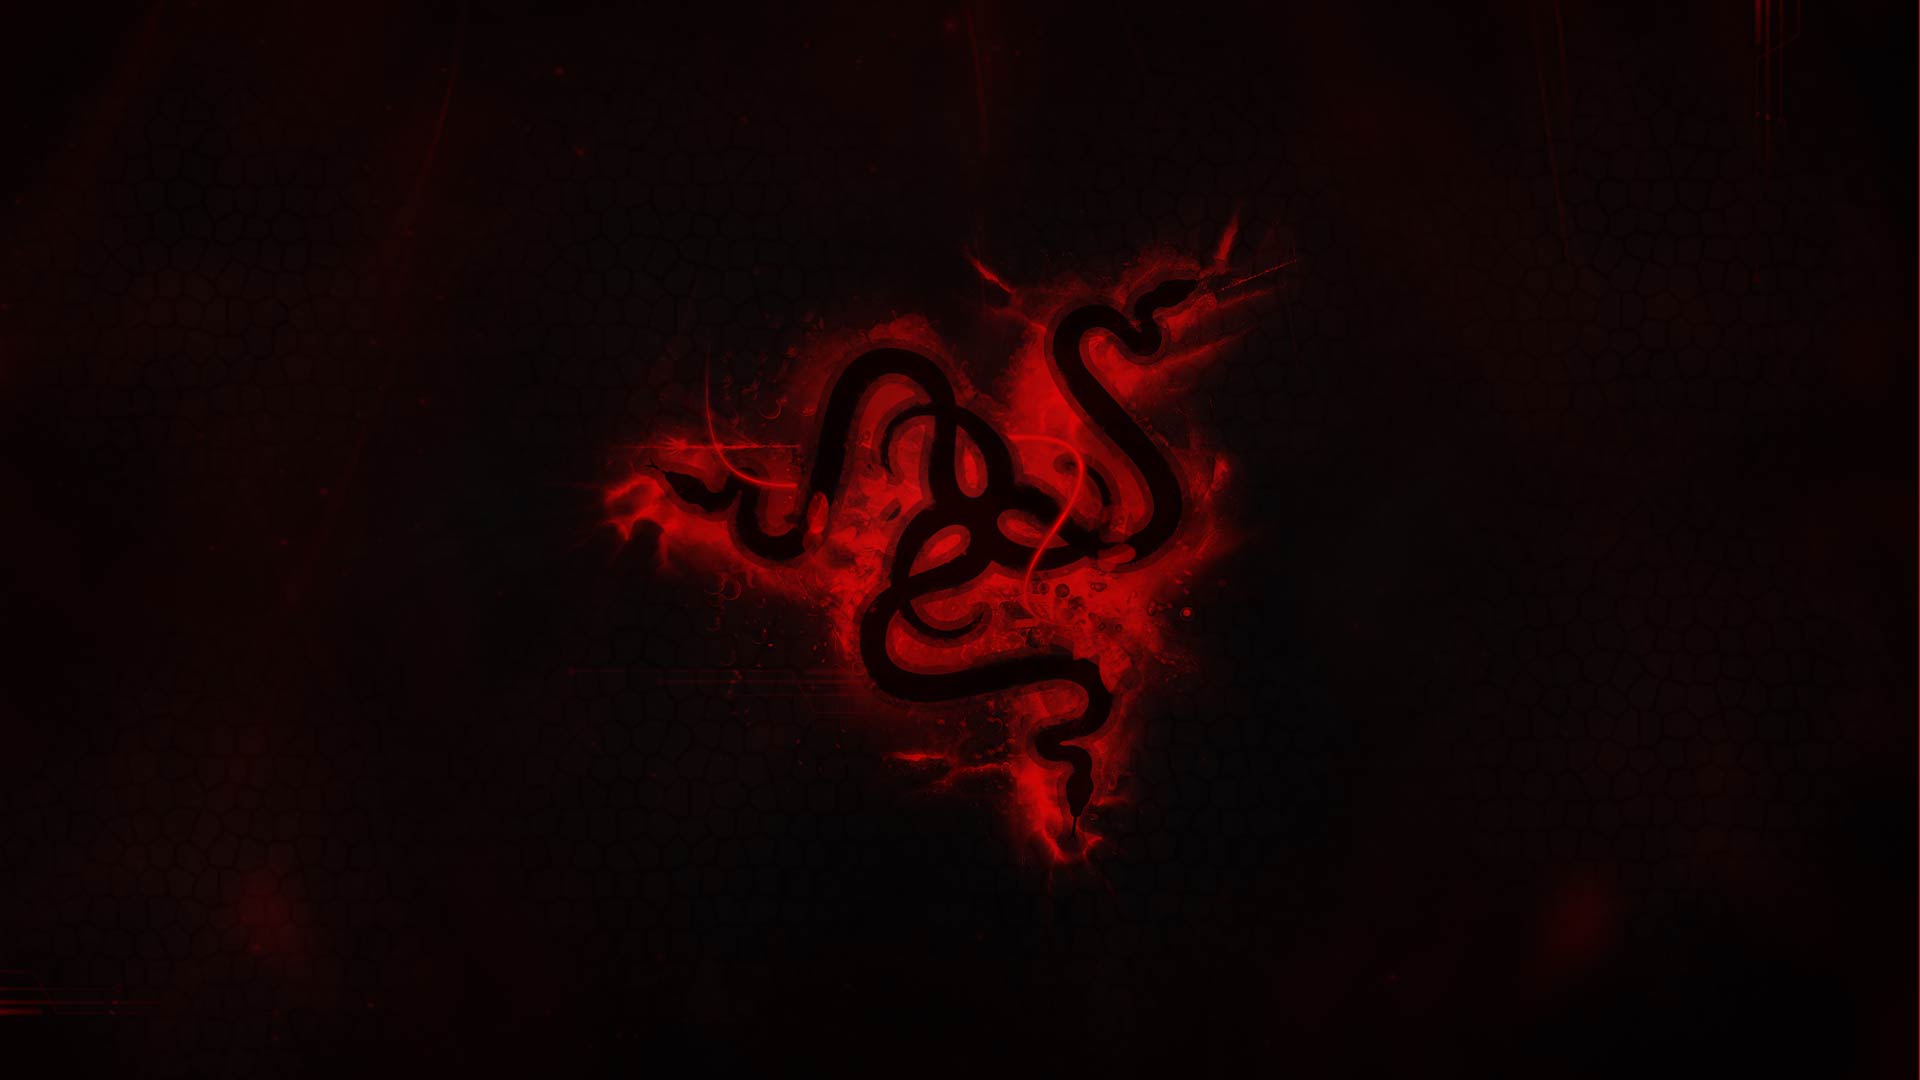 Razer Red wallpapers, Products, HQ